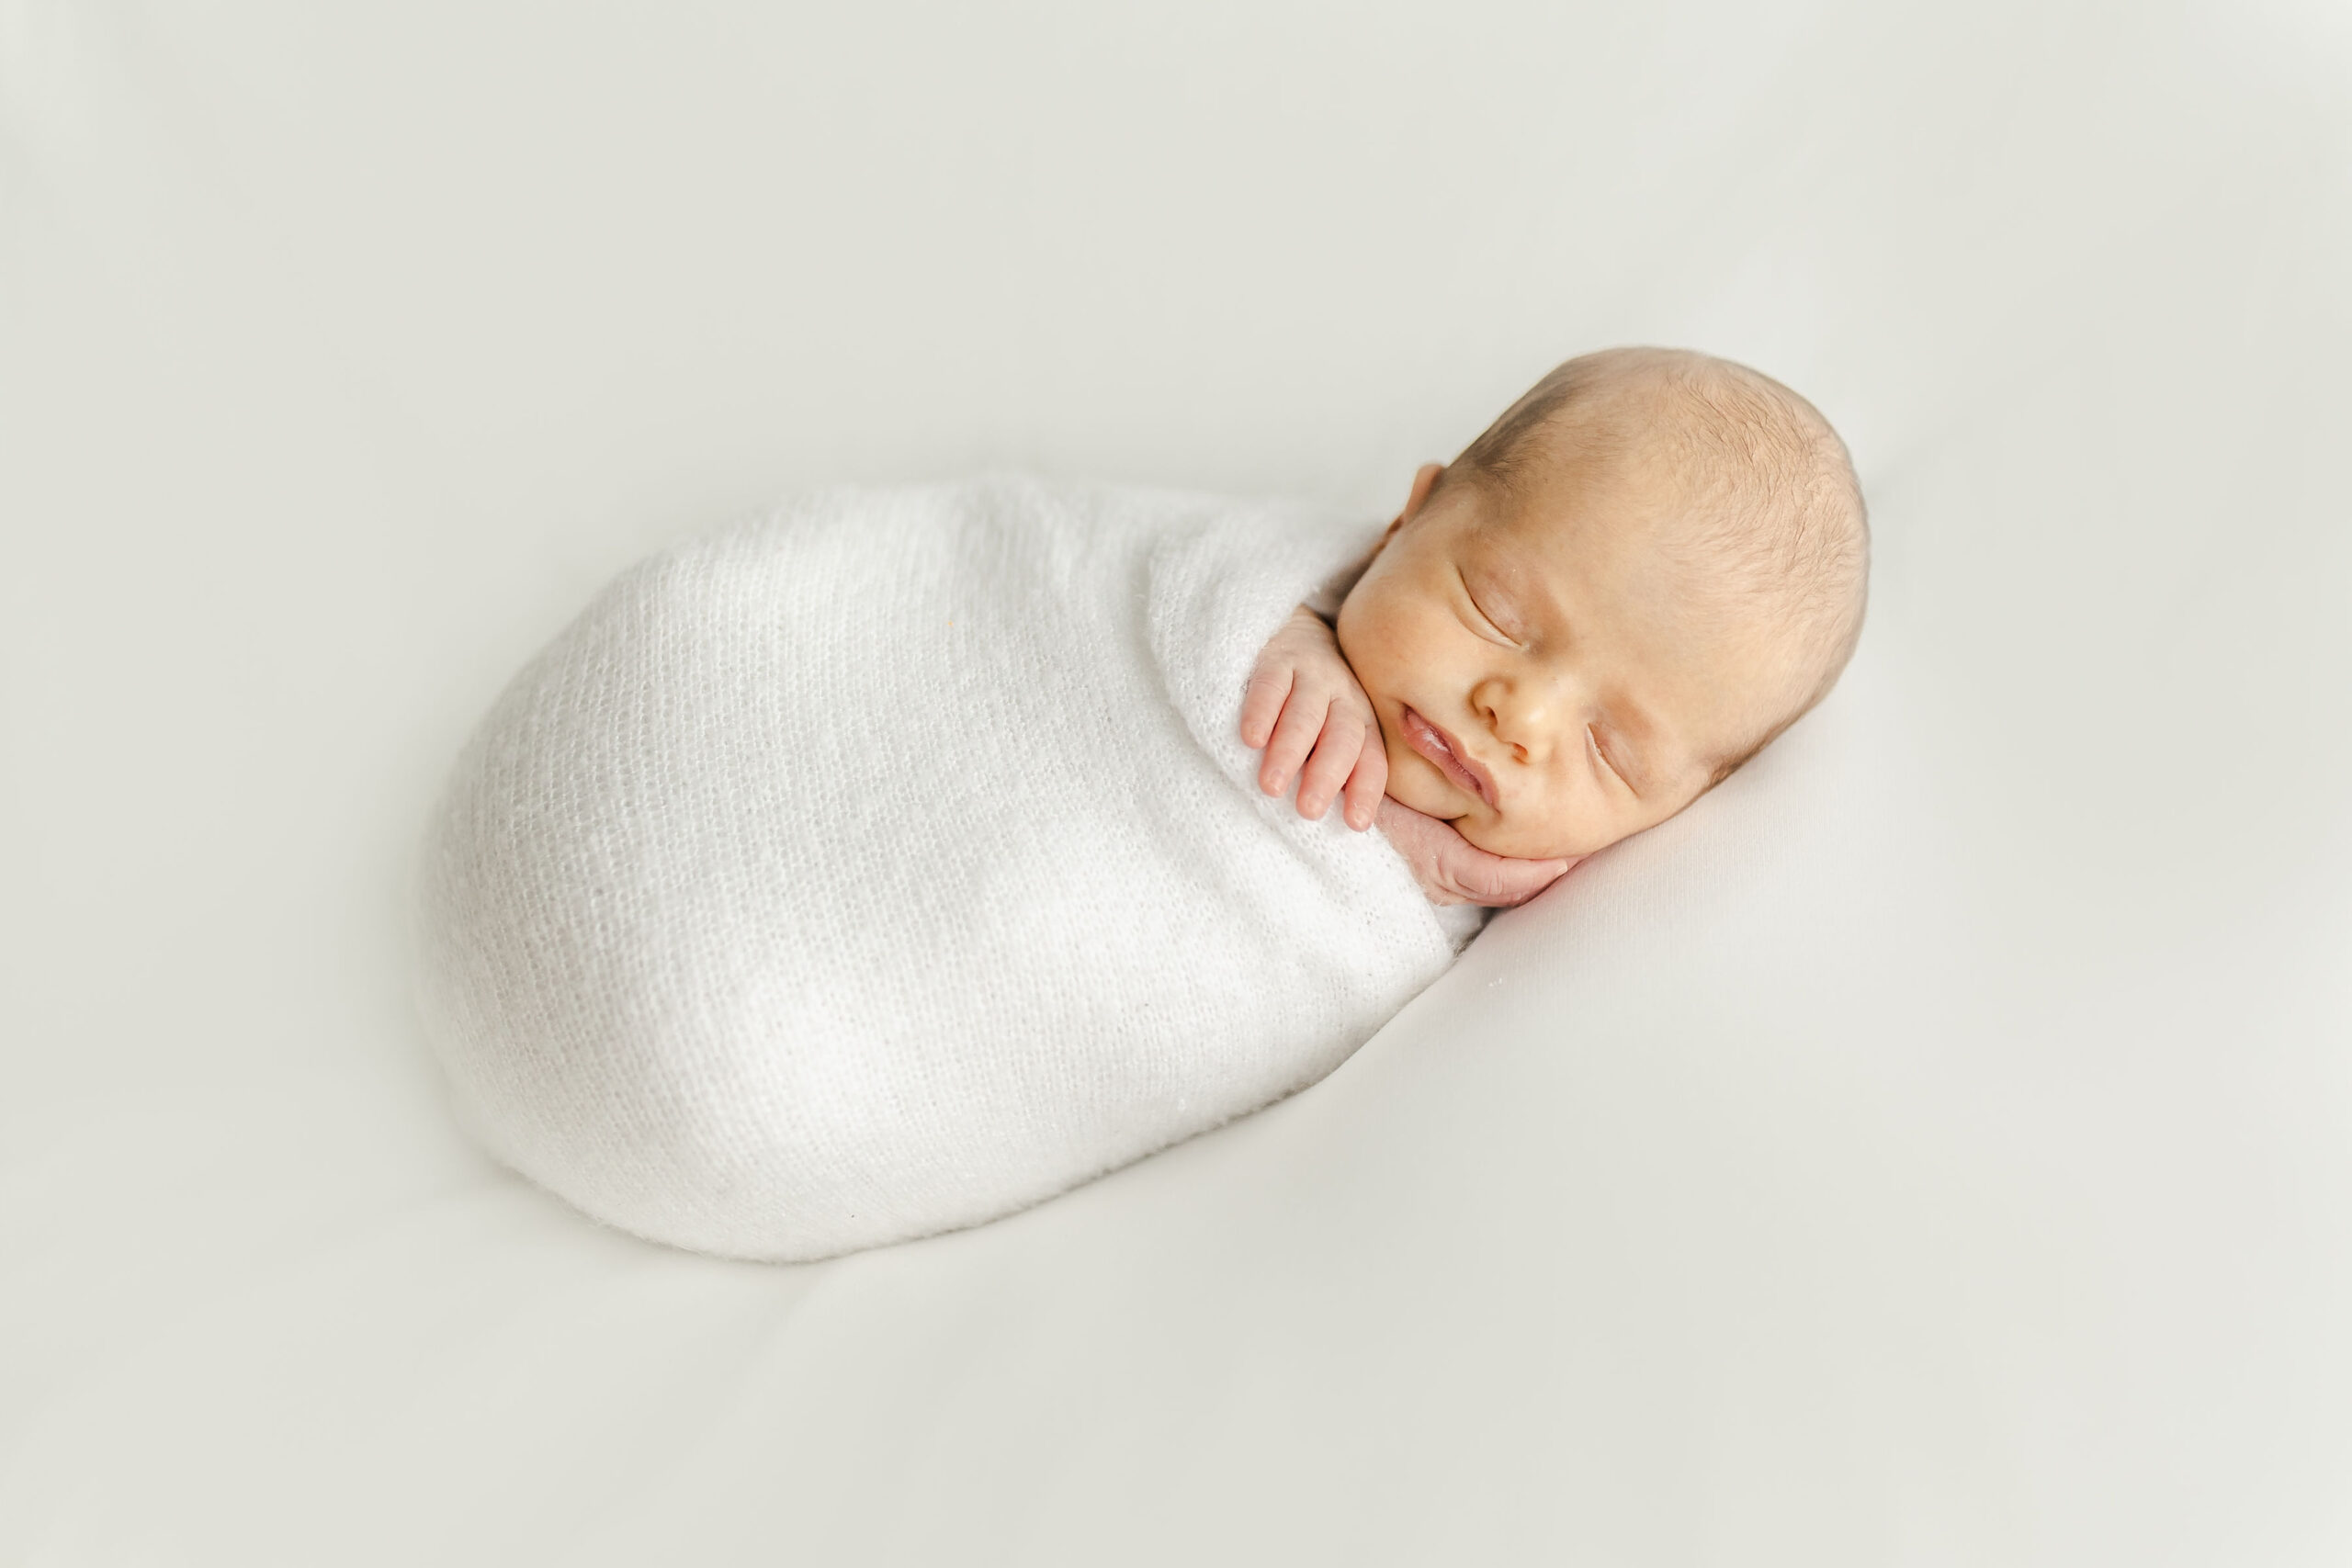 A newborn baby sleeps on its side while swaddled tightly and resting cheek on a hand babycottons miami